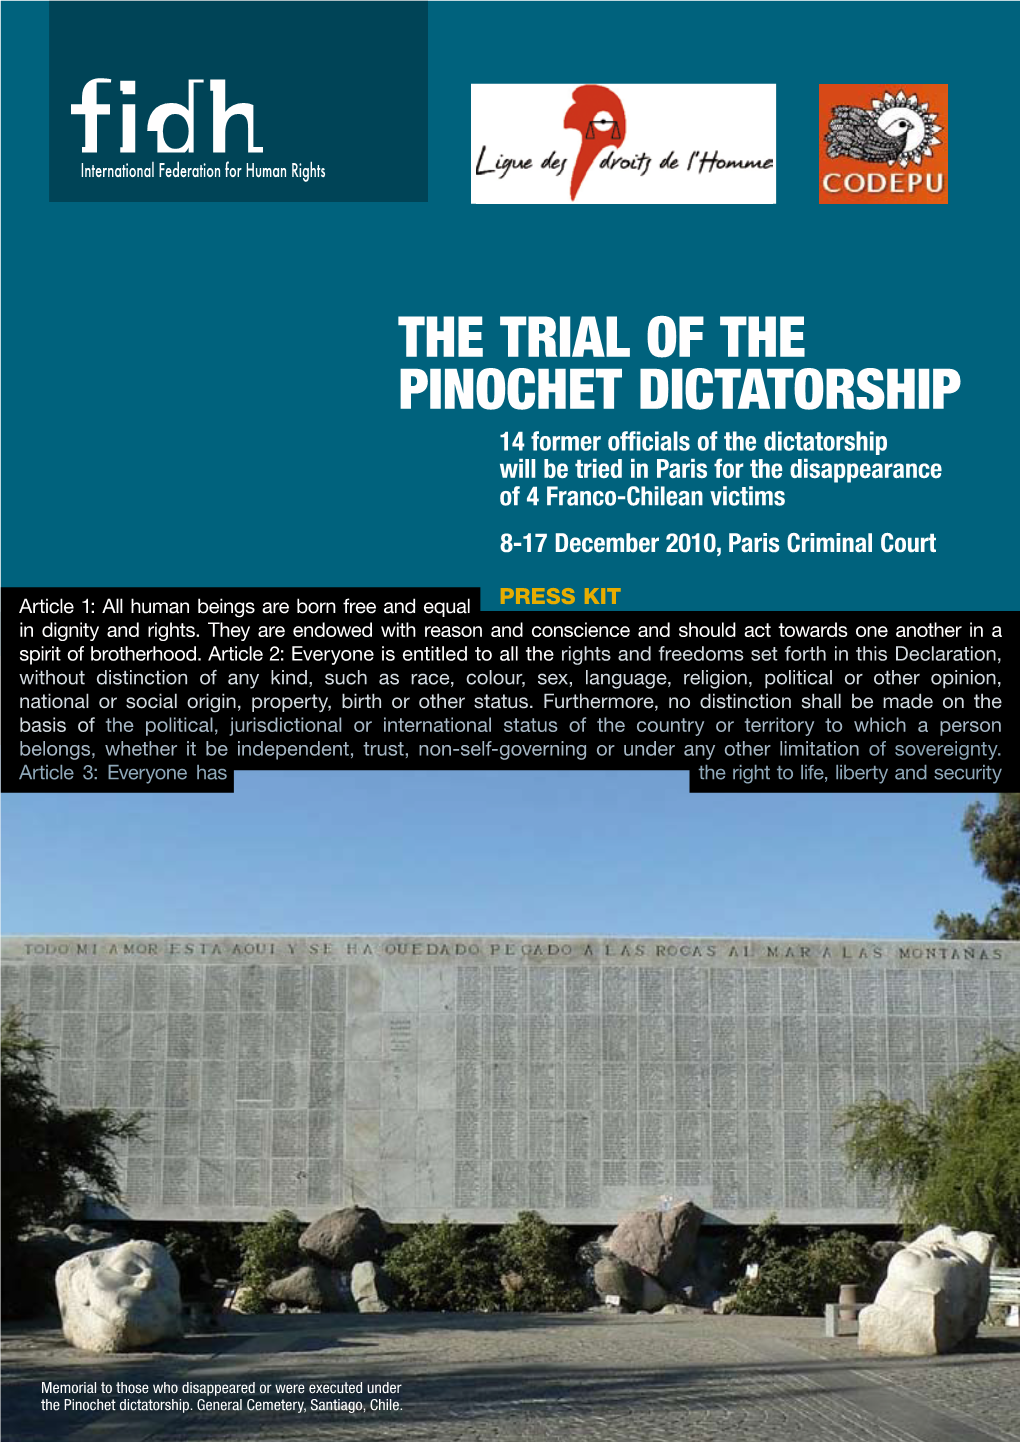 The Trial of the Pinochet Dictatorship